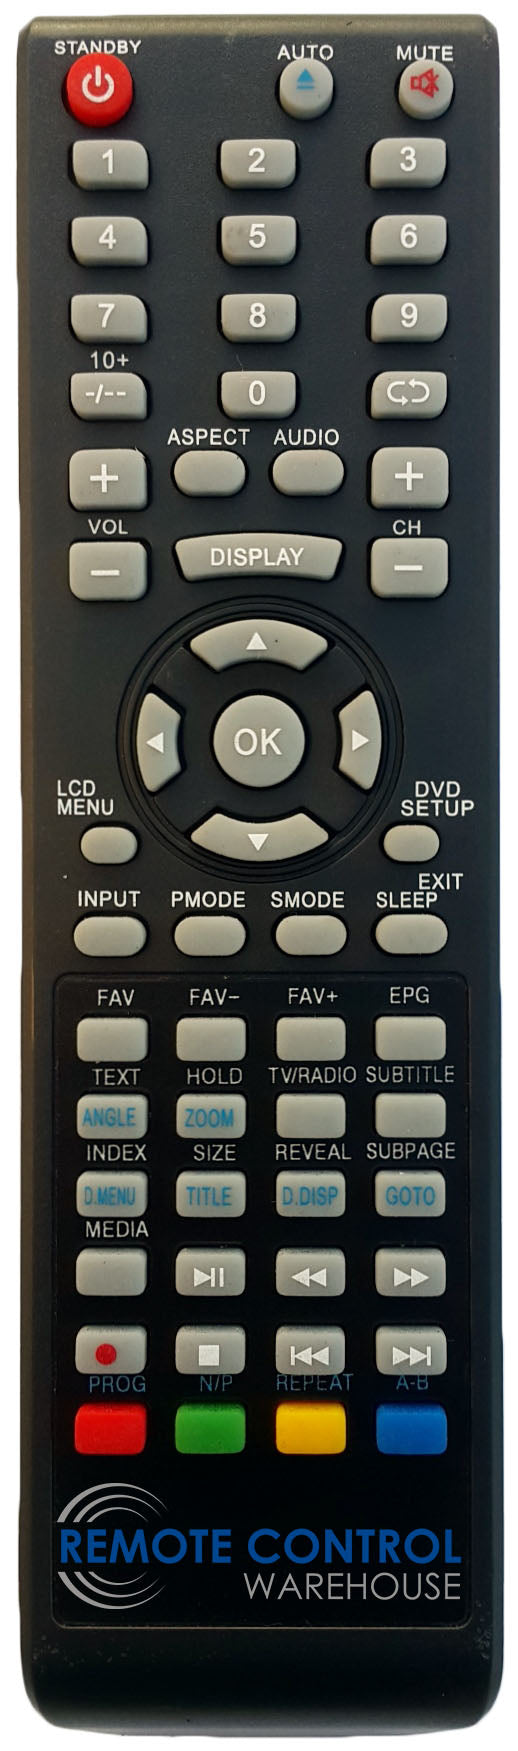 TECOVISION REPLACEMENT REMOTE CONTROL RC-W023 RCW023 - LED19BHRDWHBD LCD TV